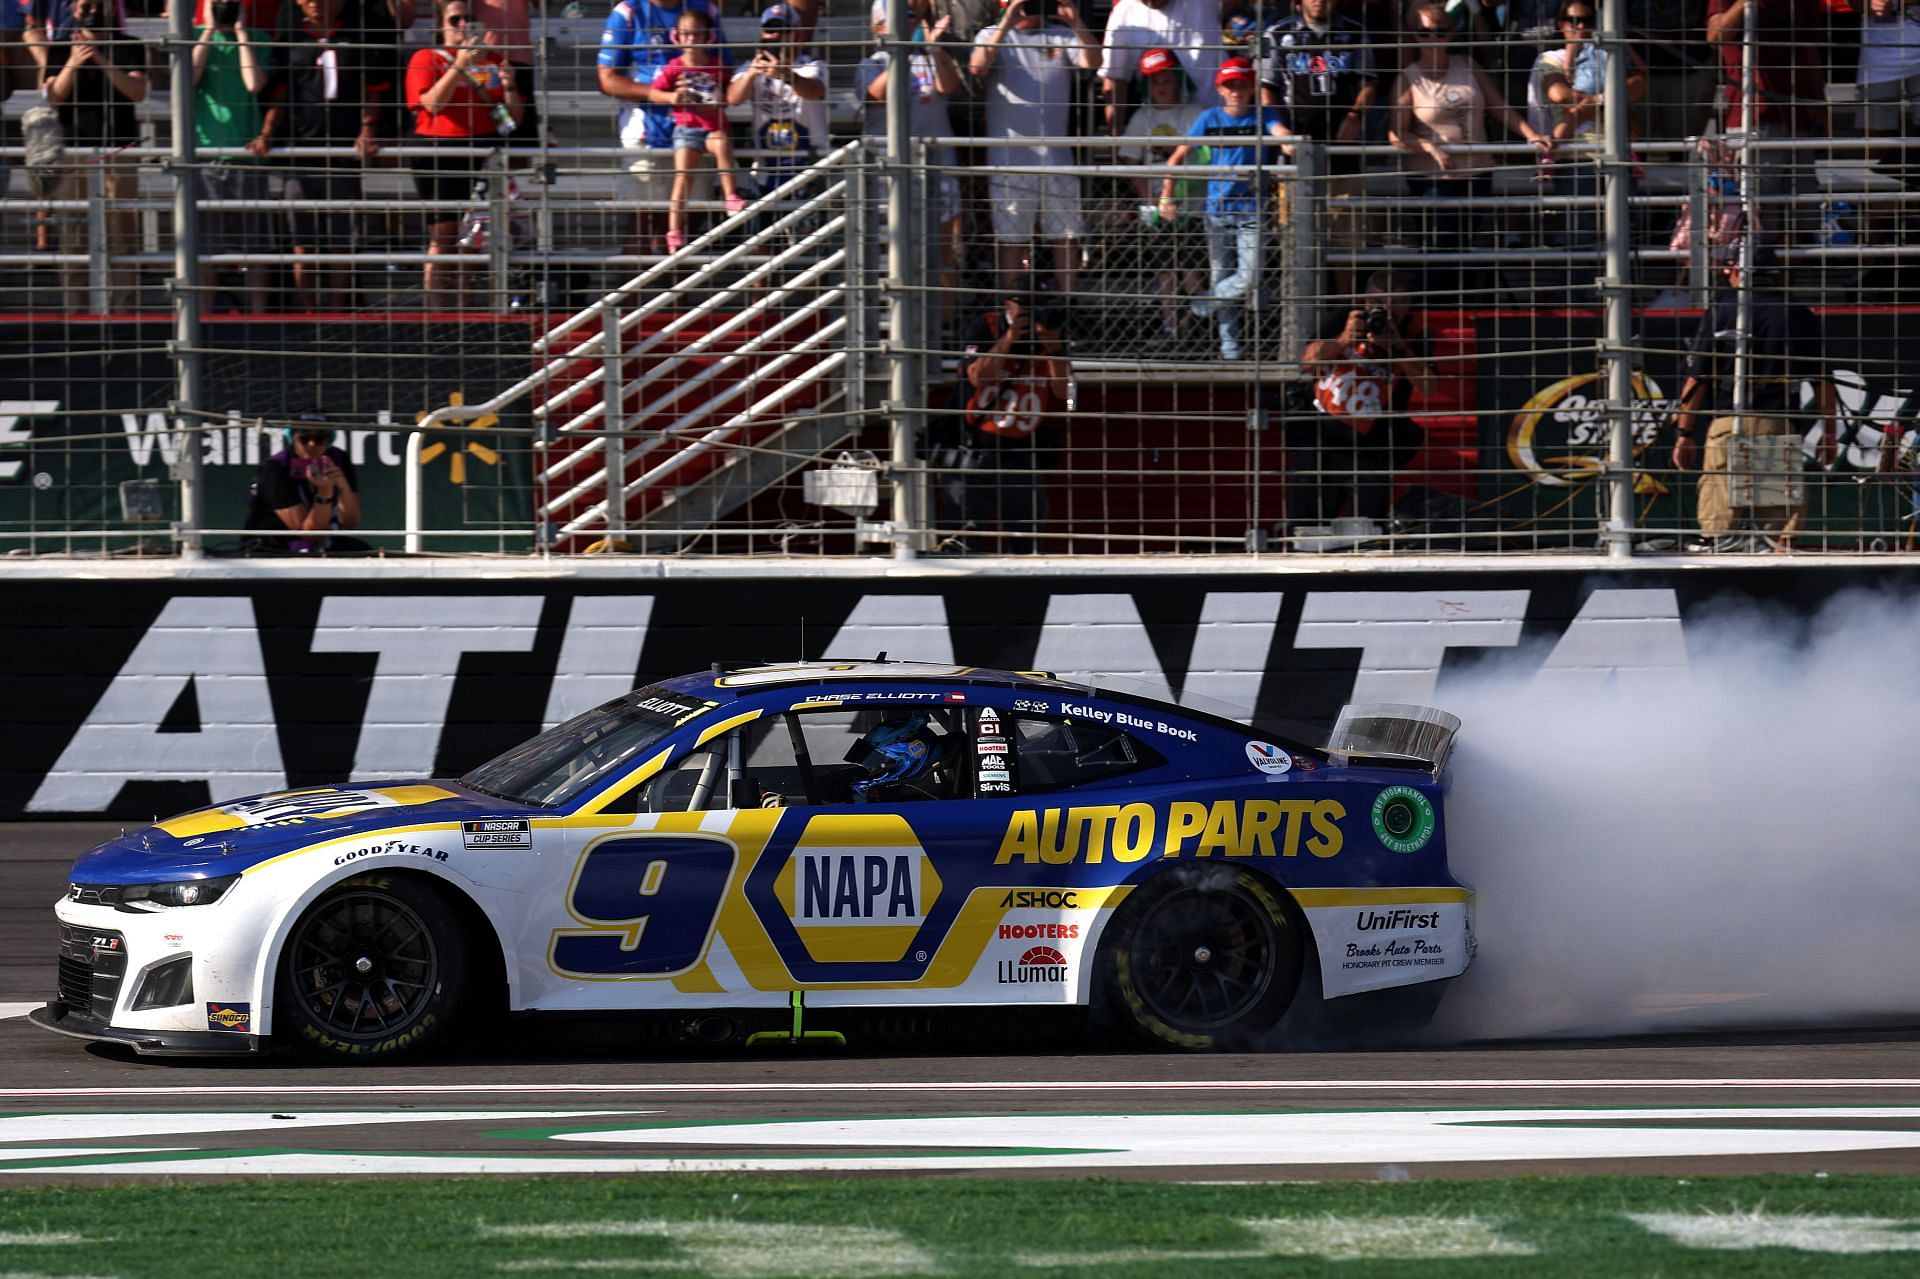 Chase Elliott celebrates with a burnout after winning the 2022 NASCAR Cup Series Quaker State 400 at Atlanta Motor Speedway in Hampton, Georgia (Photo by James Gilbert/Getty Images)